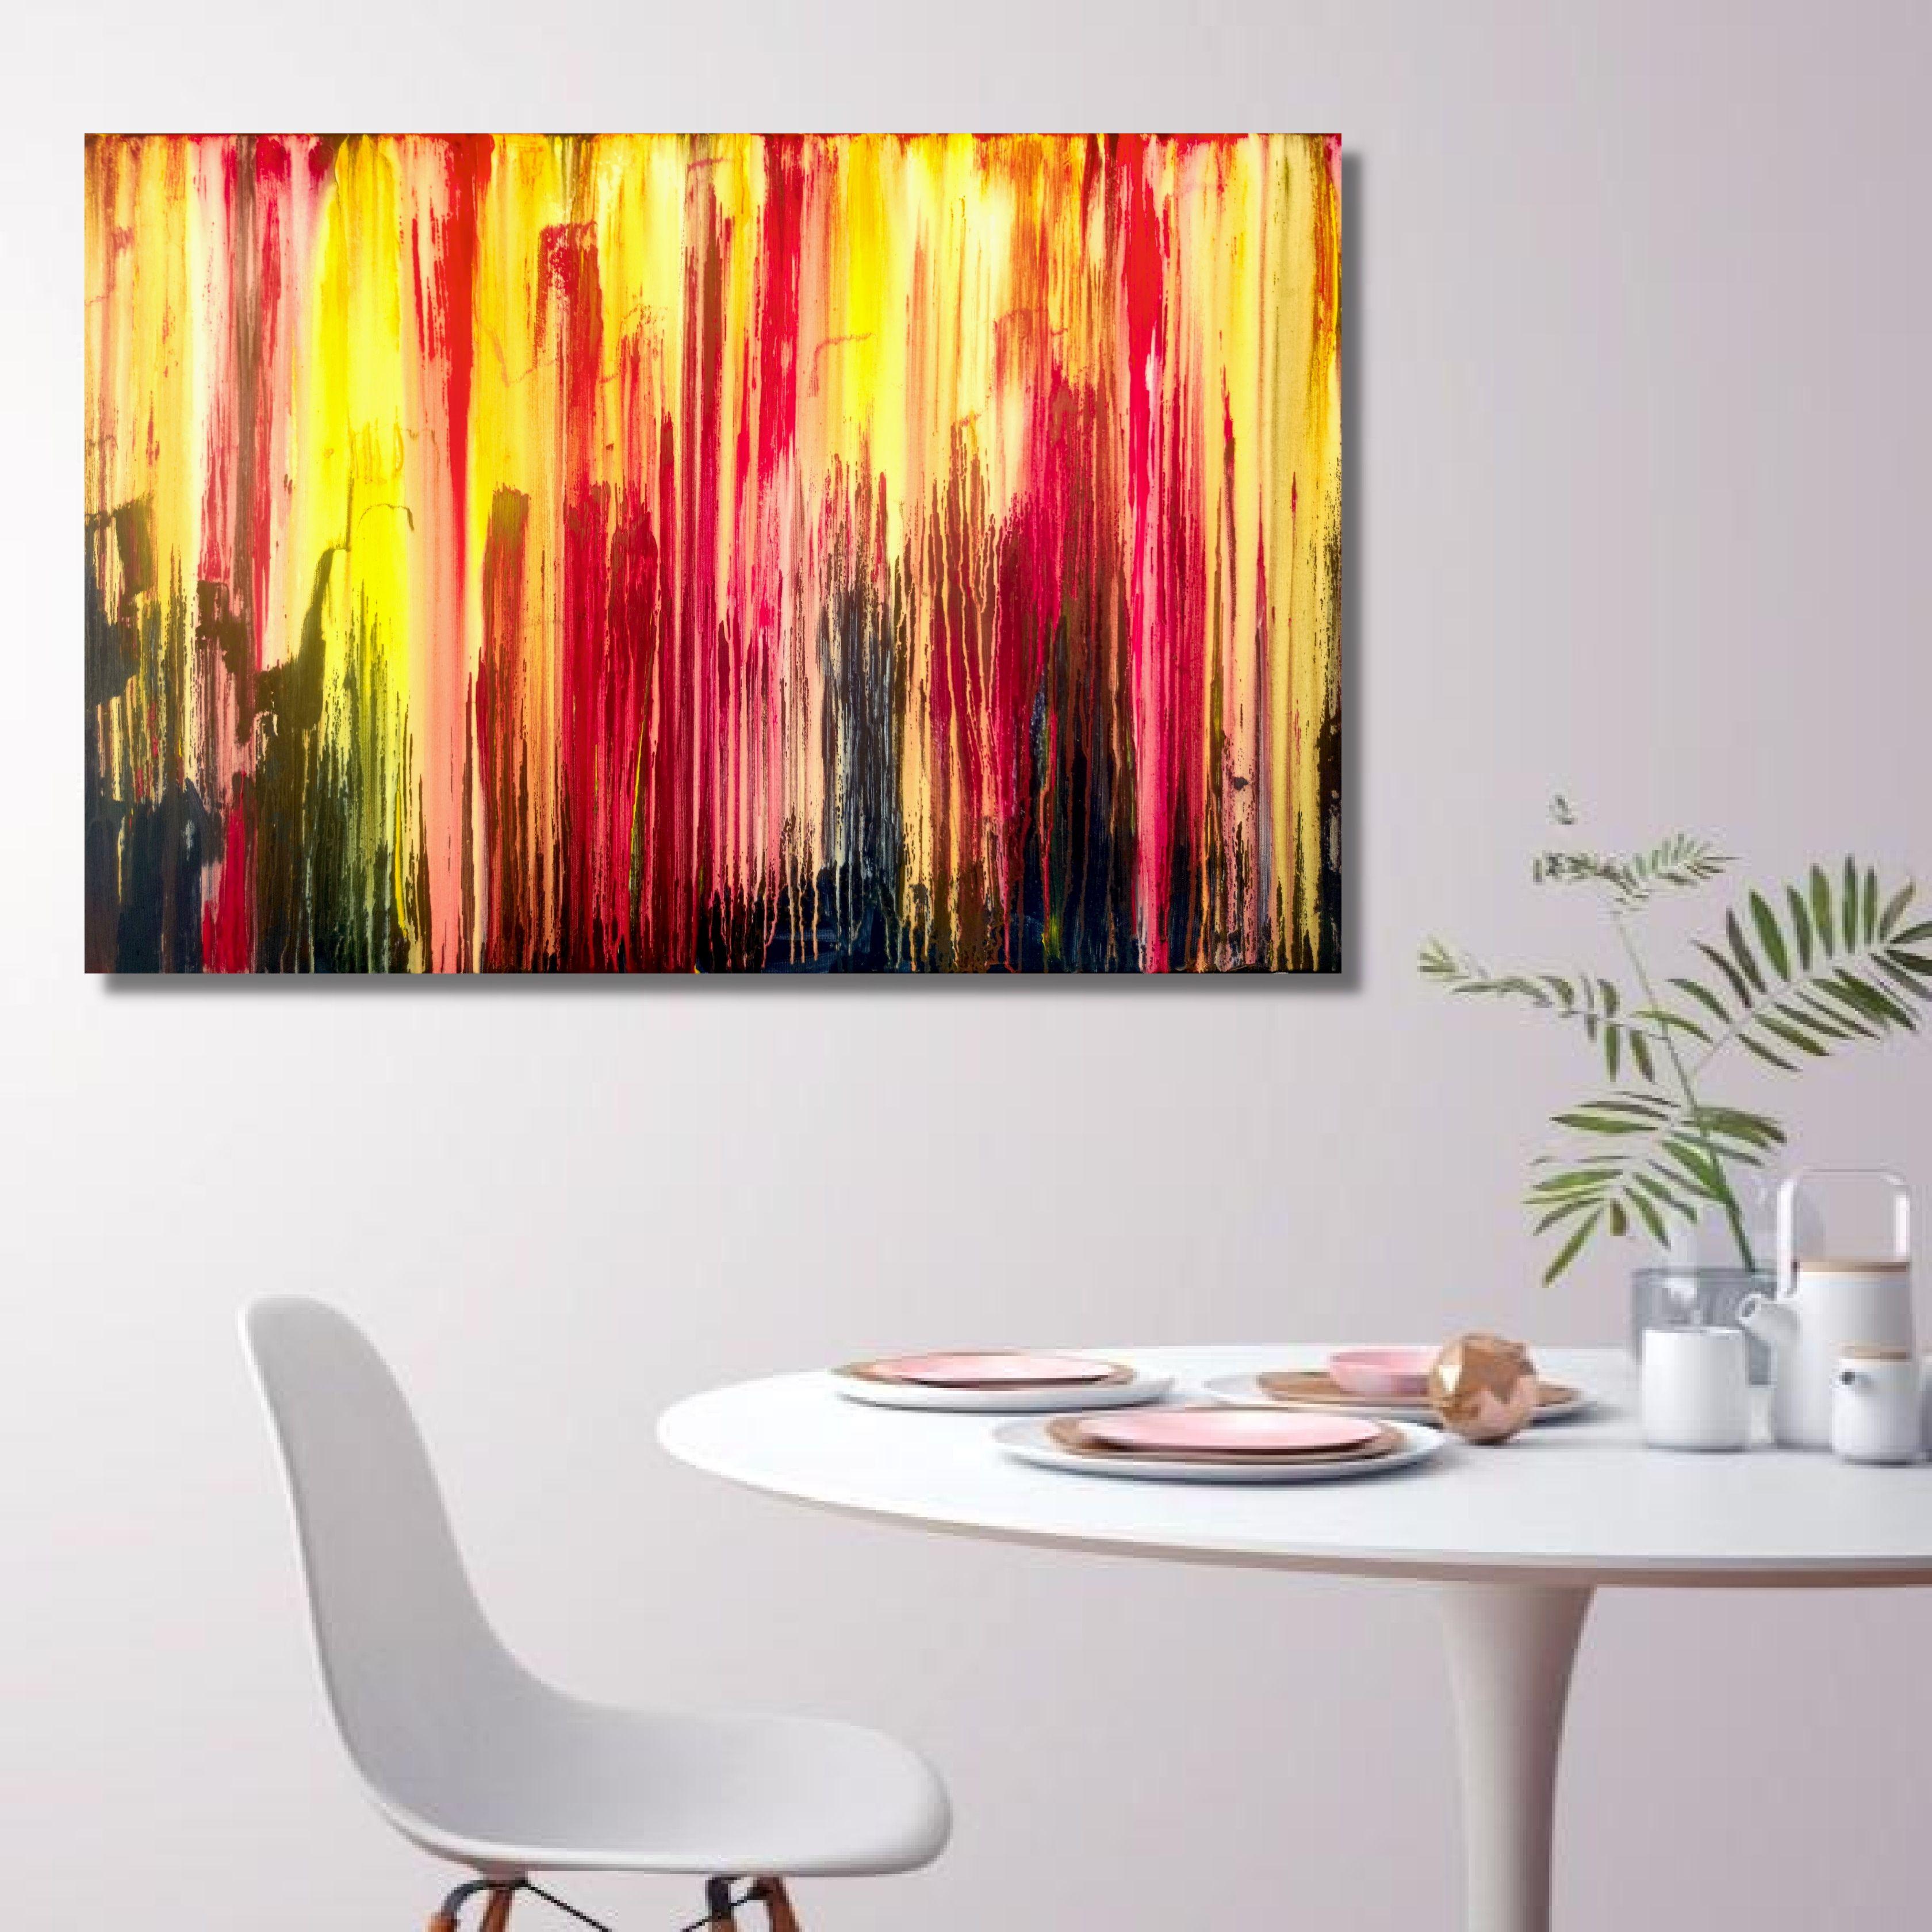 This is a one of a kind painting, an absolutely spontaneous, vibrant and unique creation by me, Carla S├í Fernandes.    This high quality acrylic painting is done on gallery wrapped canvas, with no need for framing, as the edges are painted. You